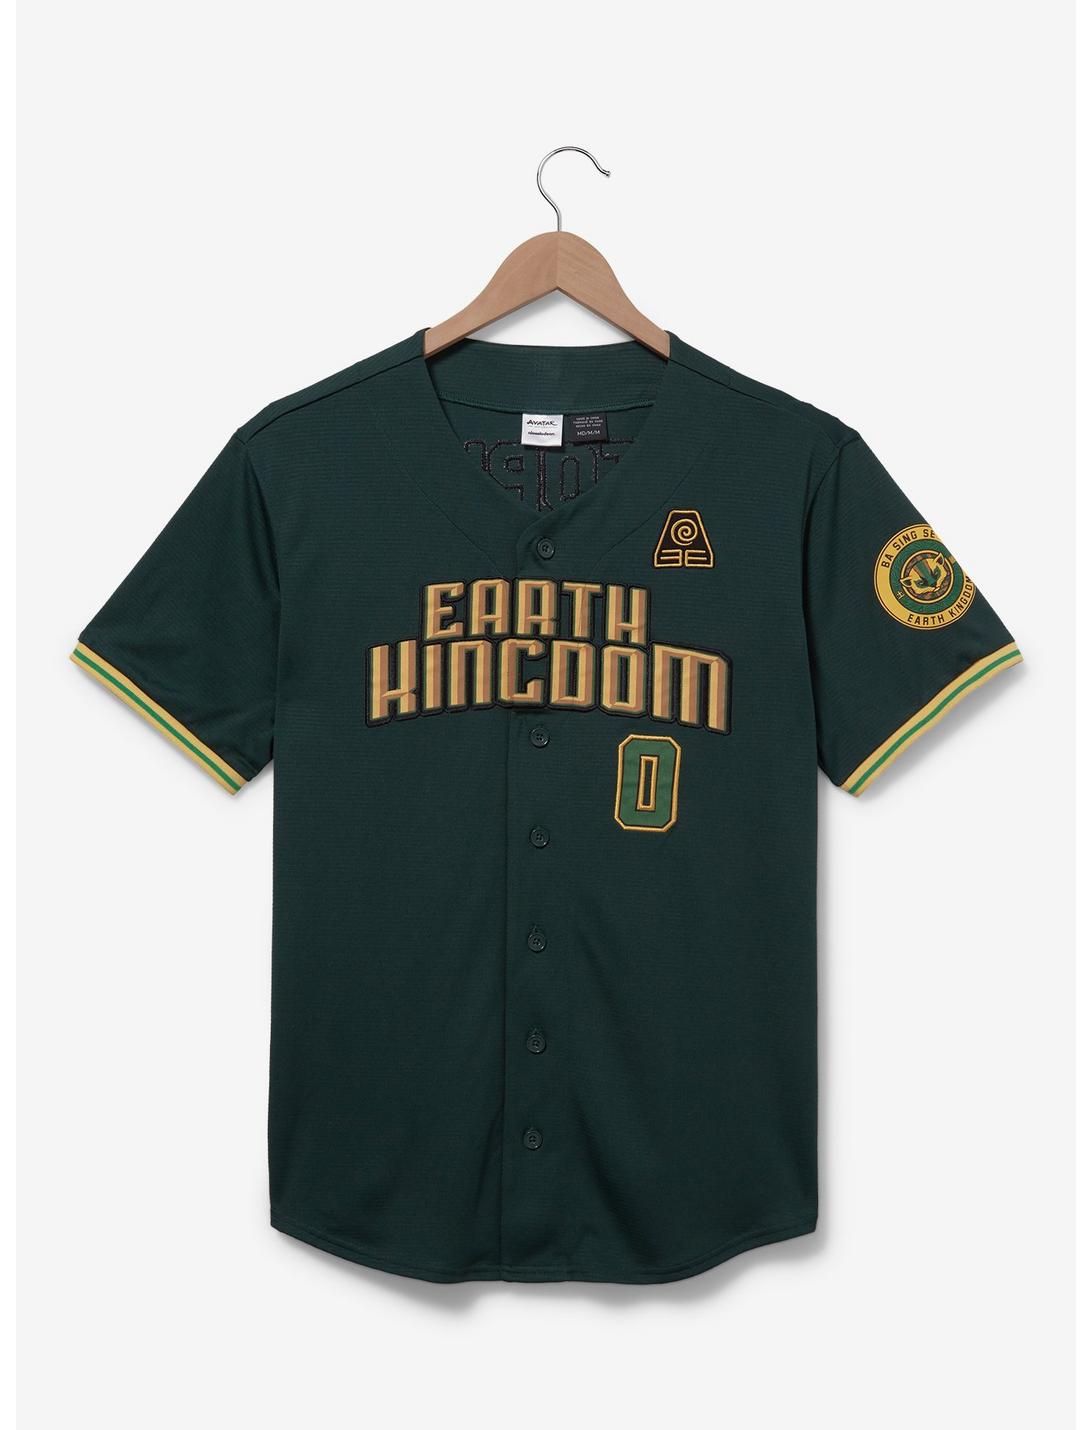 Avatar: The Last Airbender Earth Kingdom Baseball Jersey - BoxLunch Exclusive, FOREST GREEN, hi-res